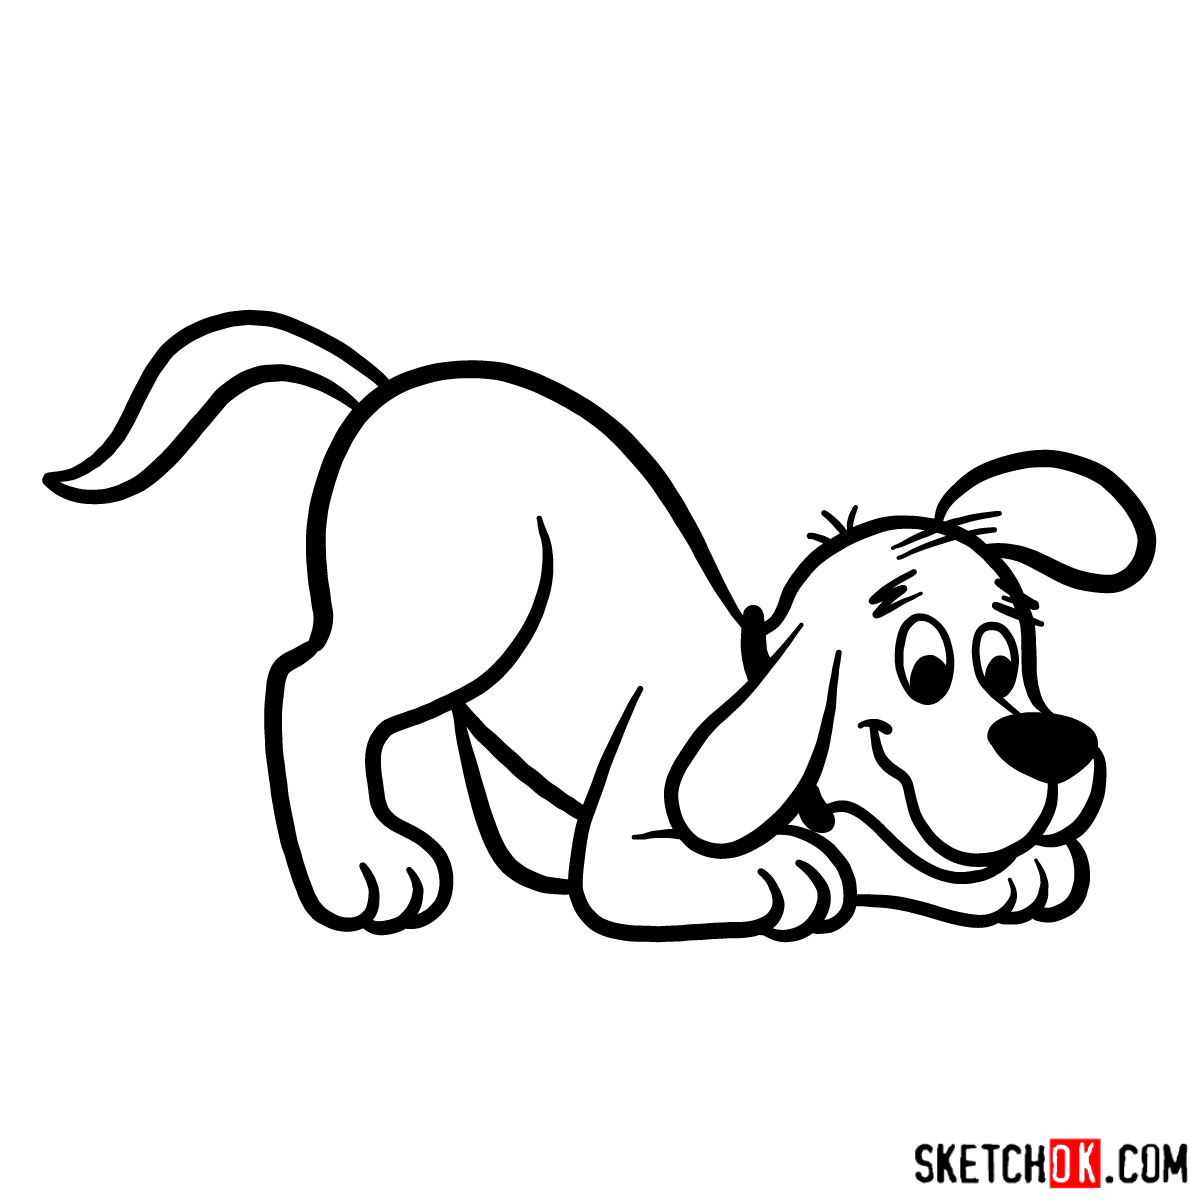 How To Draw Clifford The Big Red Dog - Sketchok Easy Drawing Guides